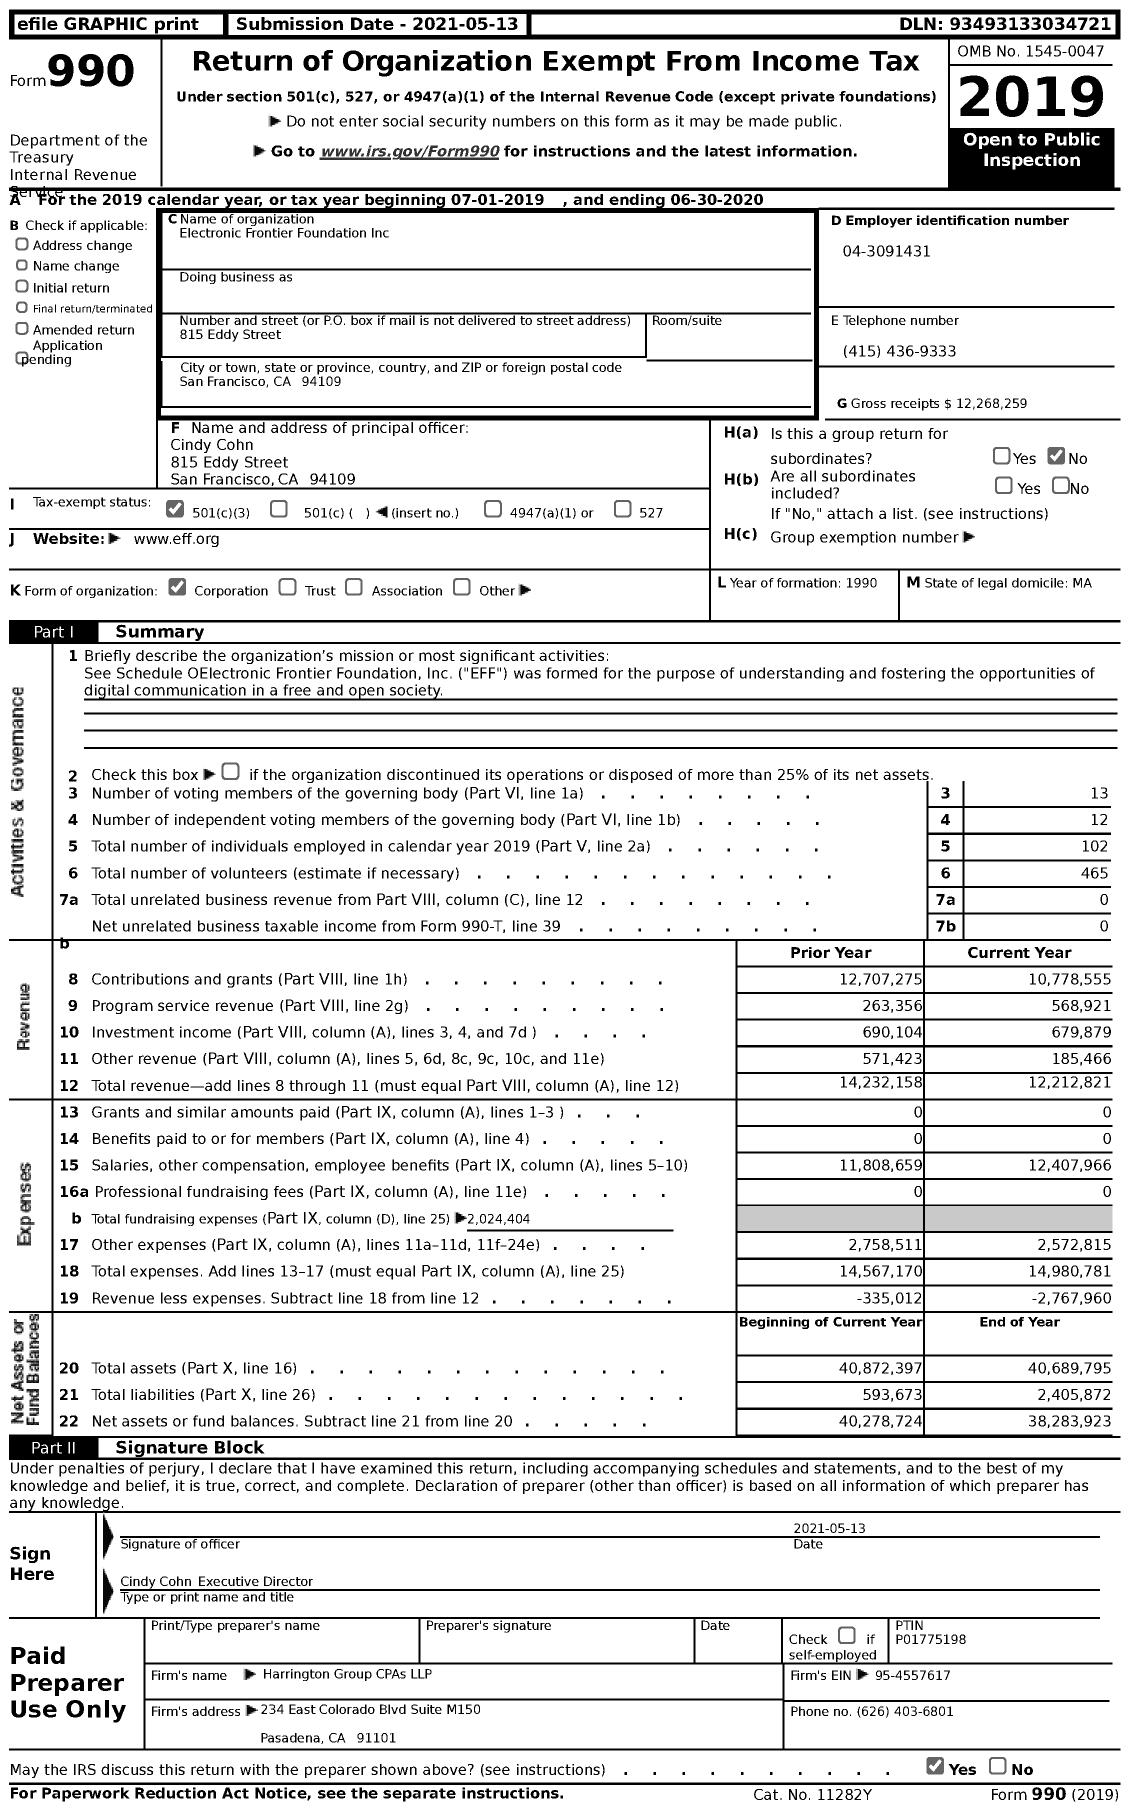 Image of first page of 2019 Form 990 for Electronic Frontier Foundation (EFF)